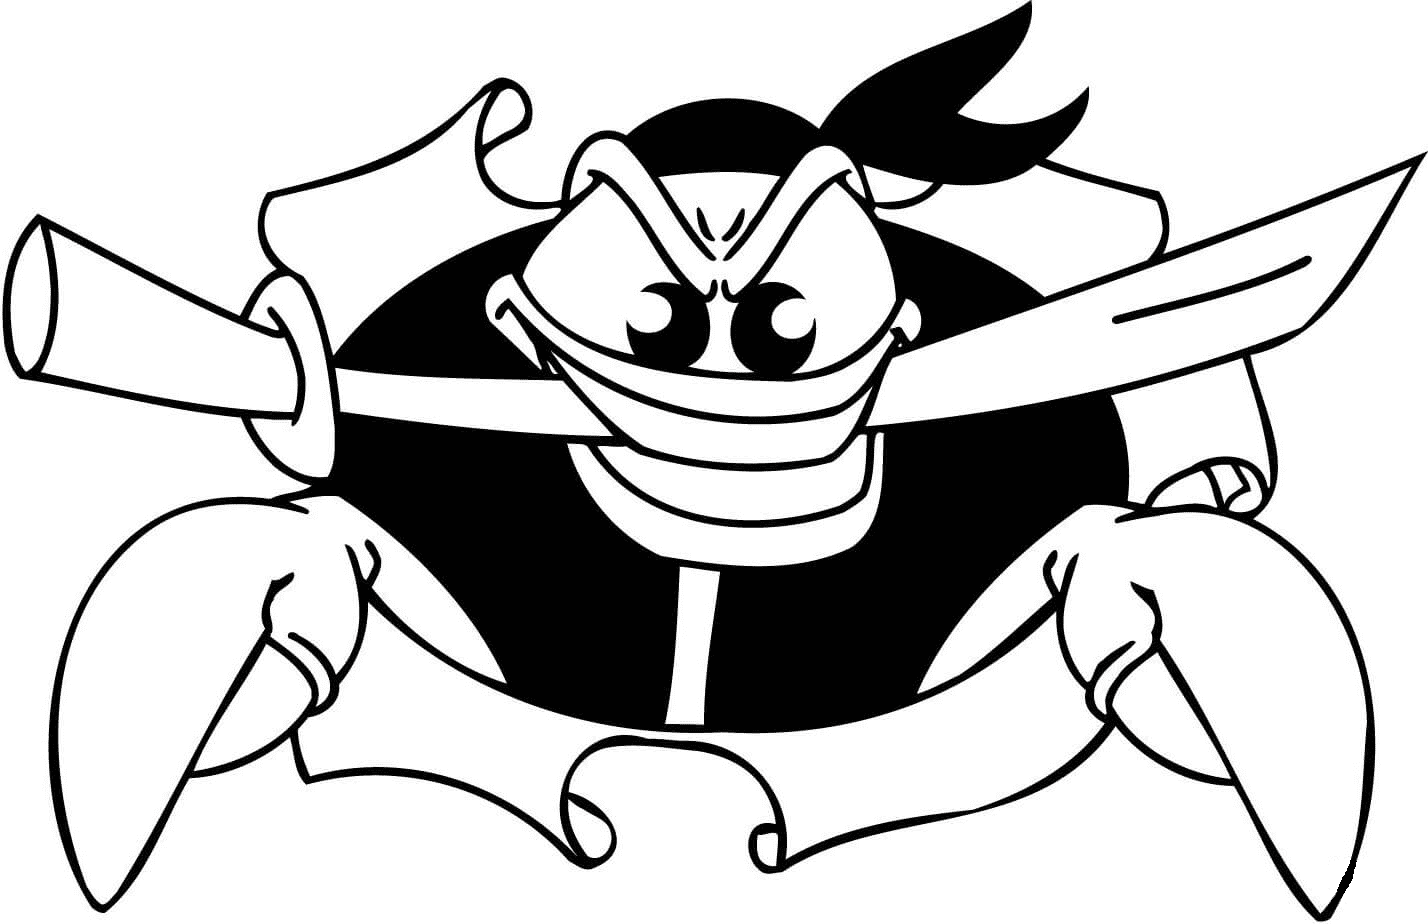 Pirate Crab with a Sword in the Mouth Coloring Page